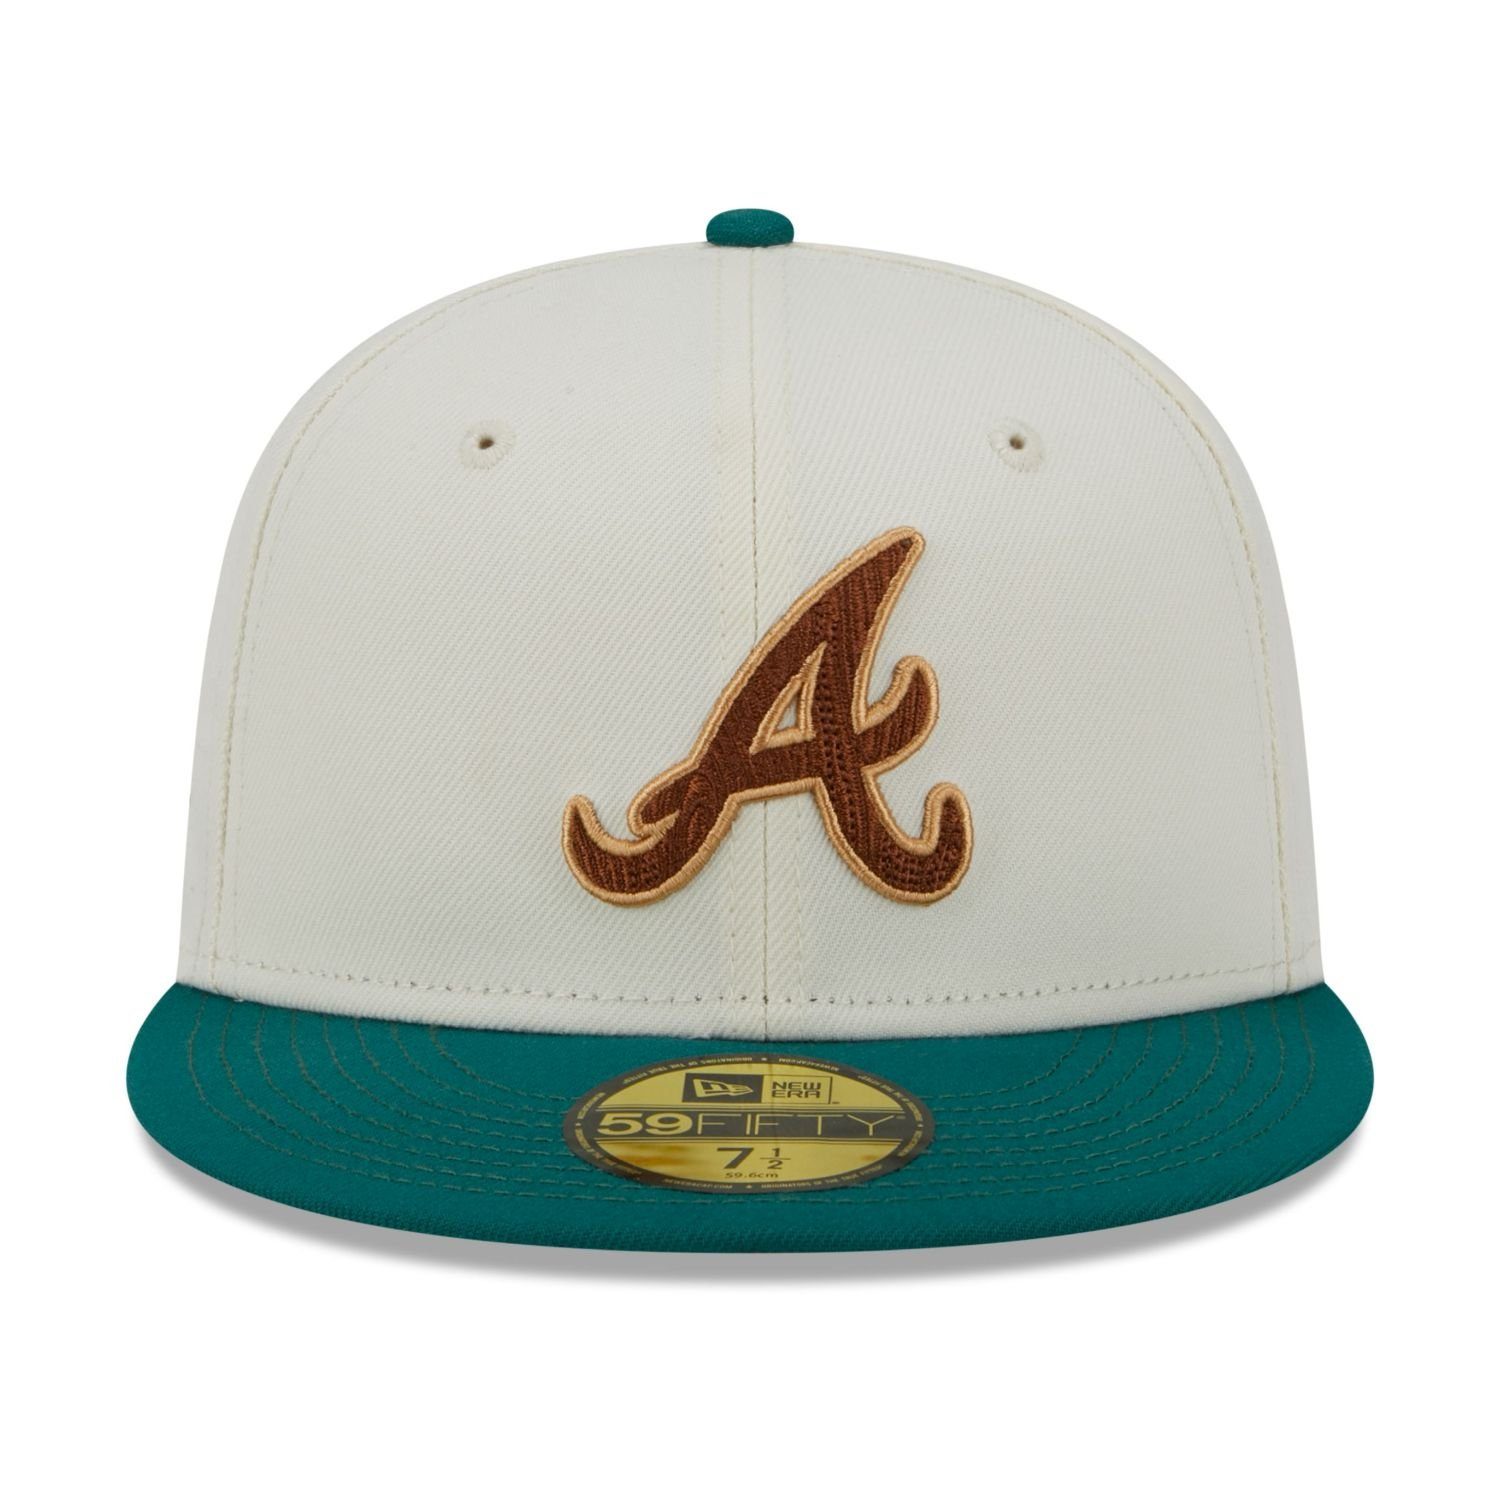 New Era Fitted Cap 59Fifty Braves CAMP Atlanta